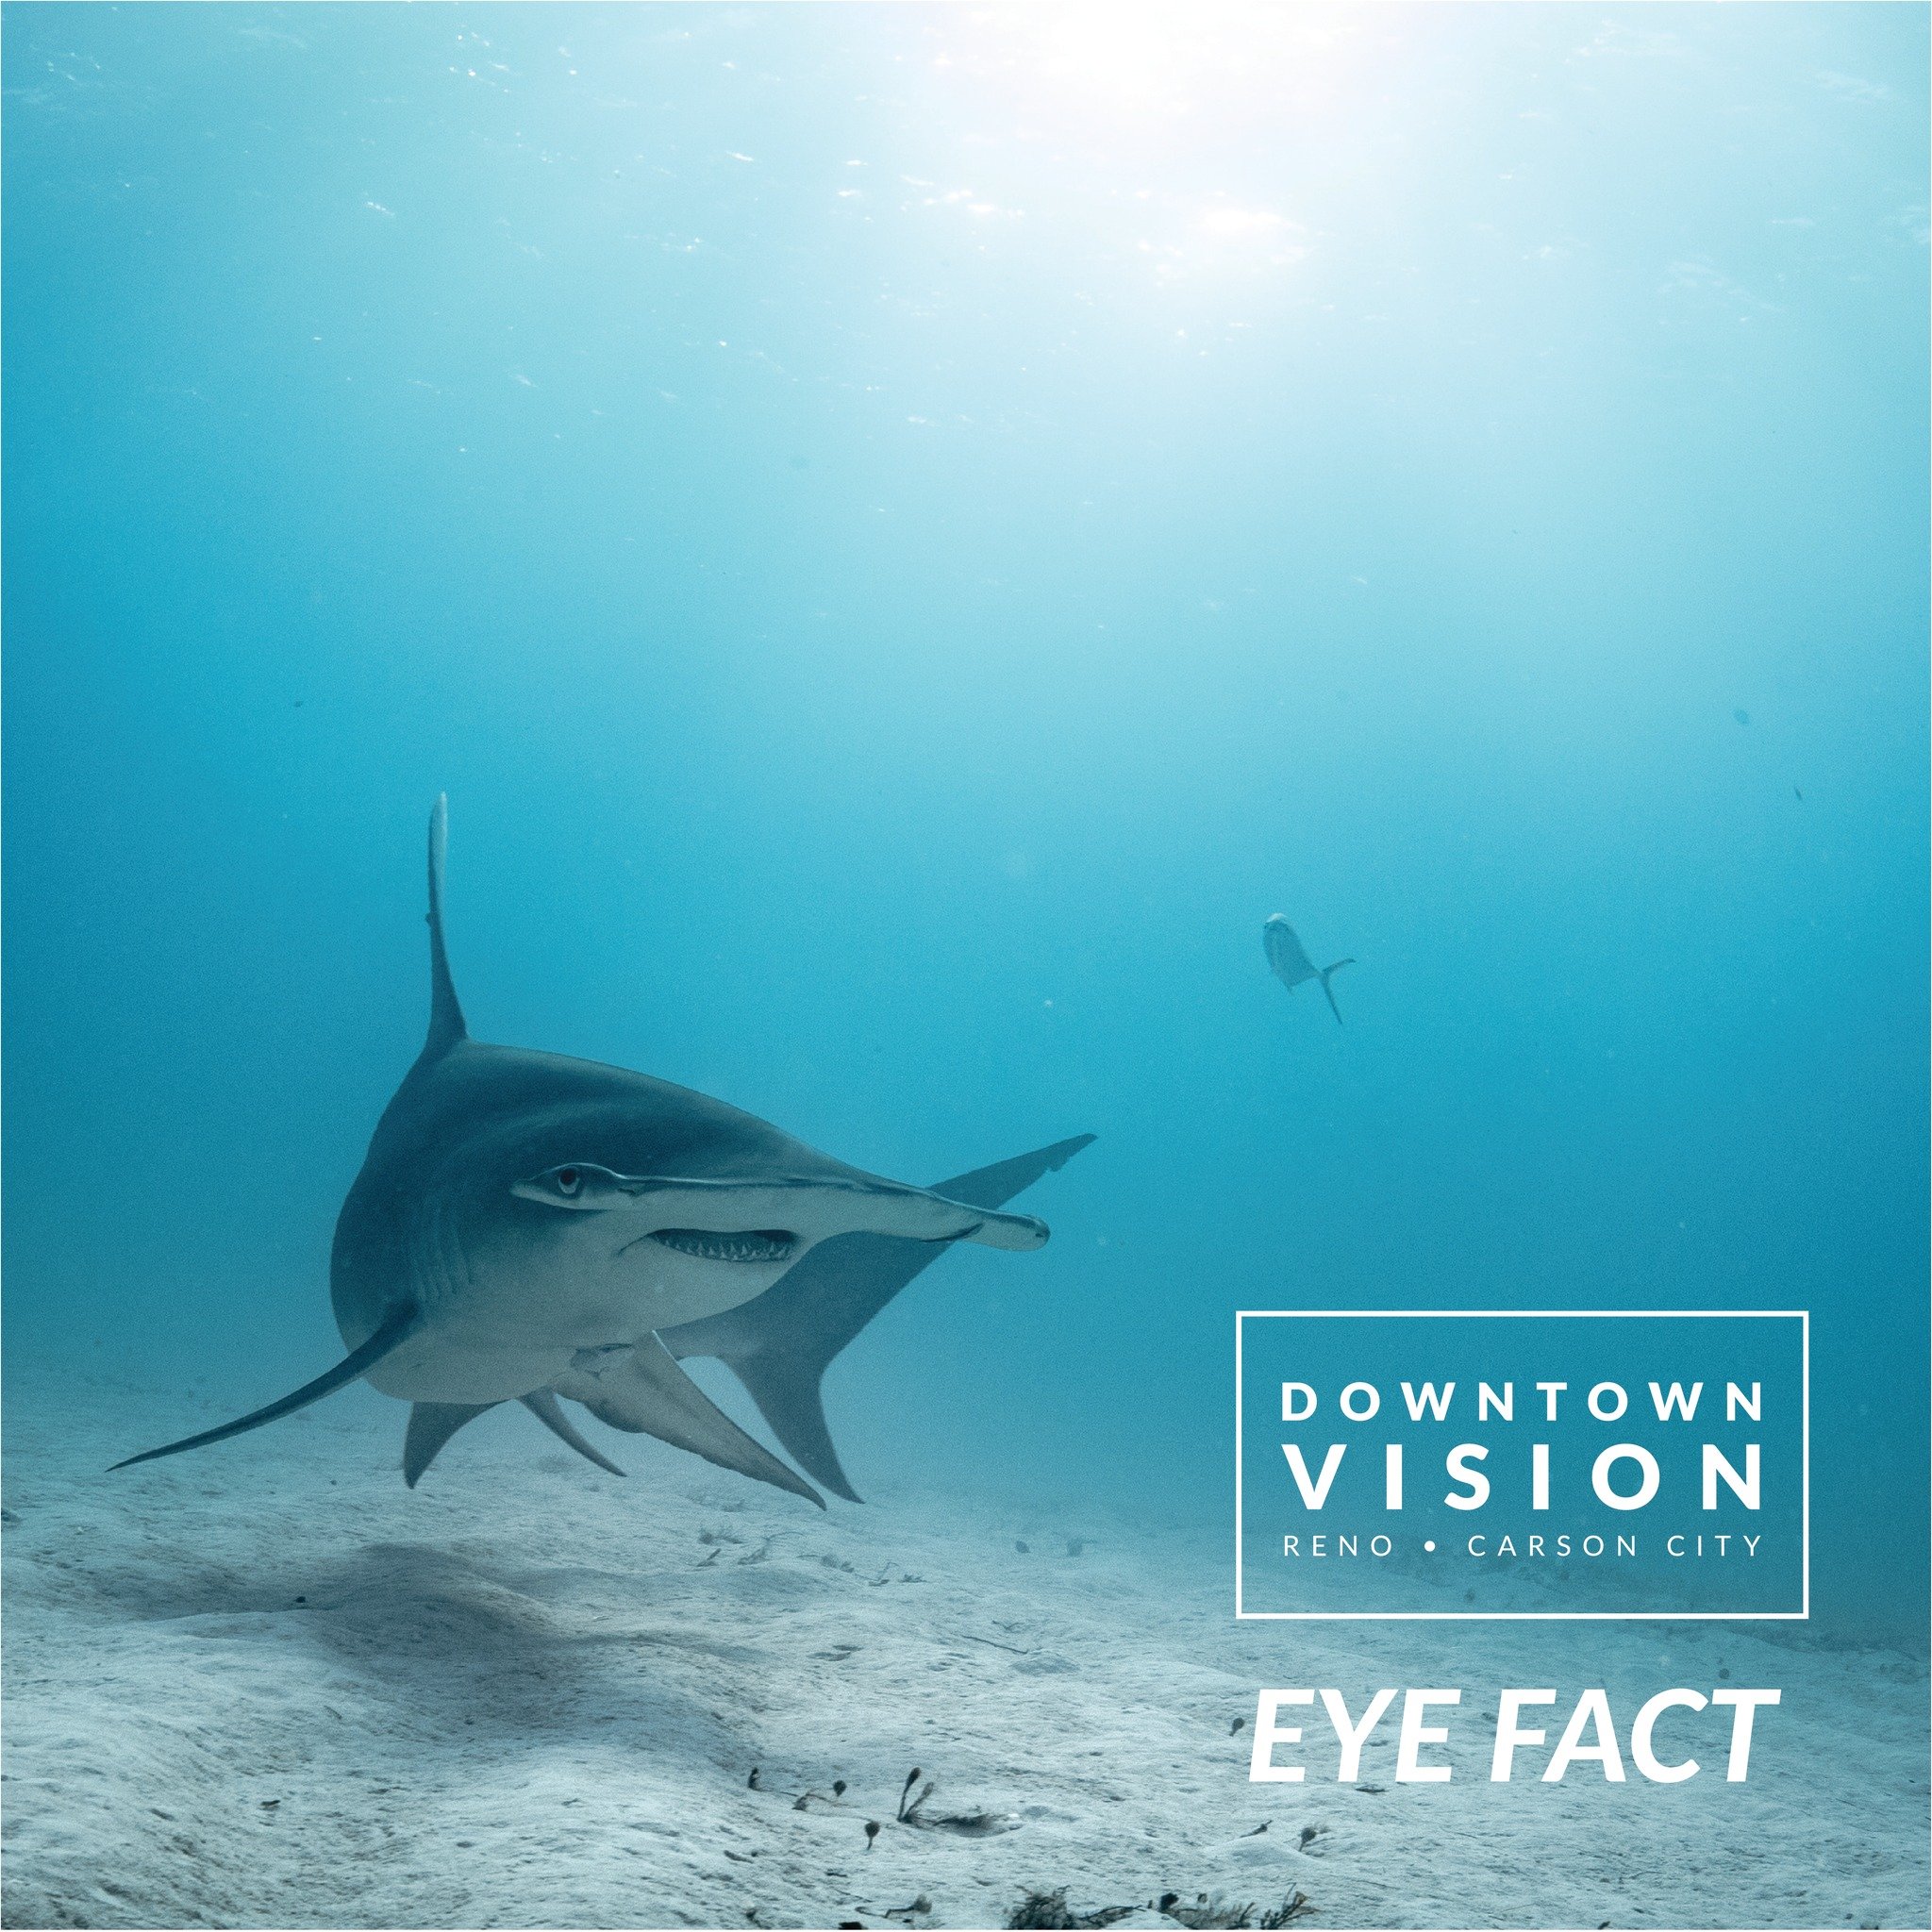 Did you know we share eye traits similar to those of the Hammerhead shark? Because of their wide-set eyes, they have stereo vision similar to that of humans. This means they have improved depth perception compared to other sharks, making it easier to